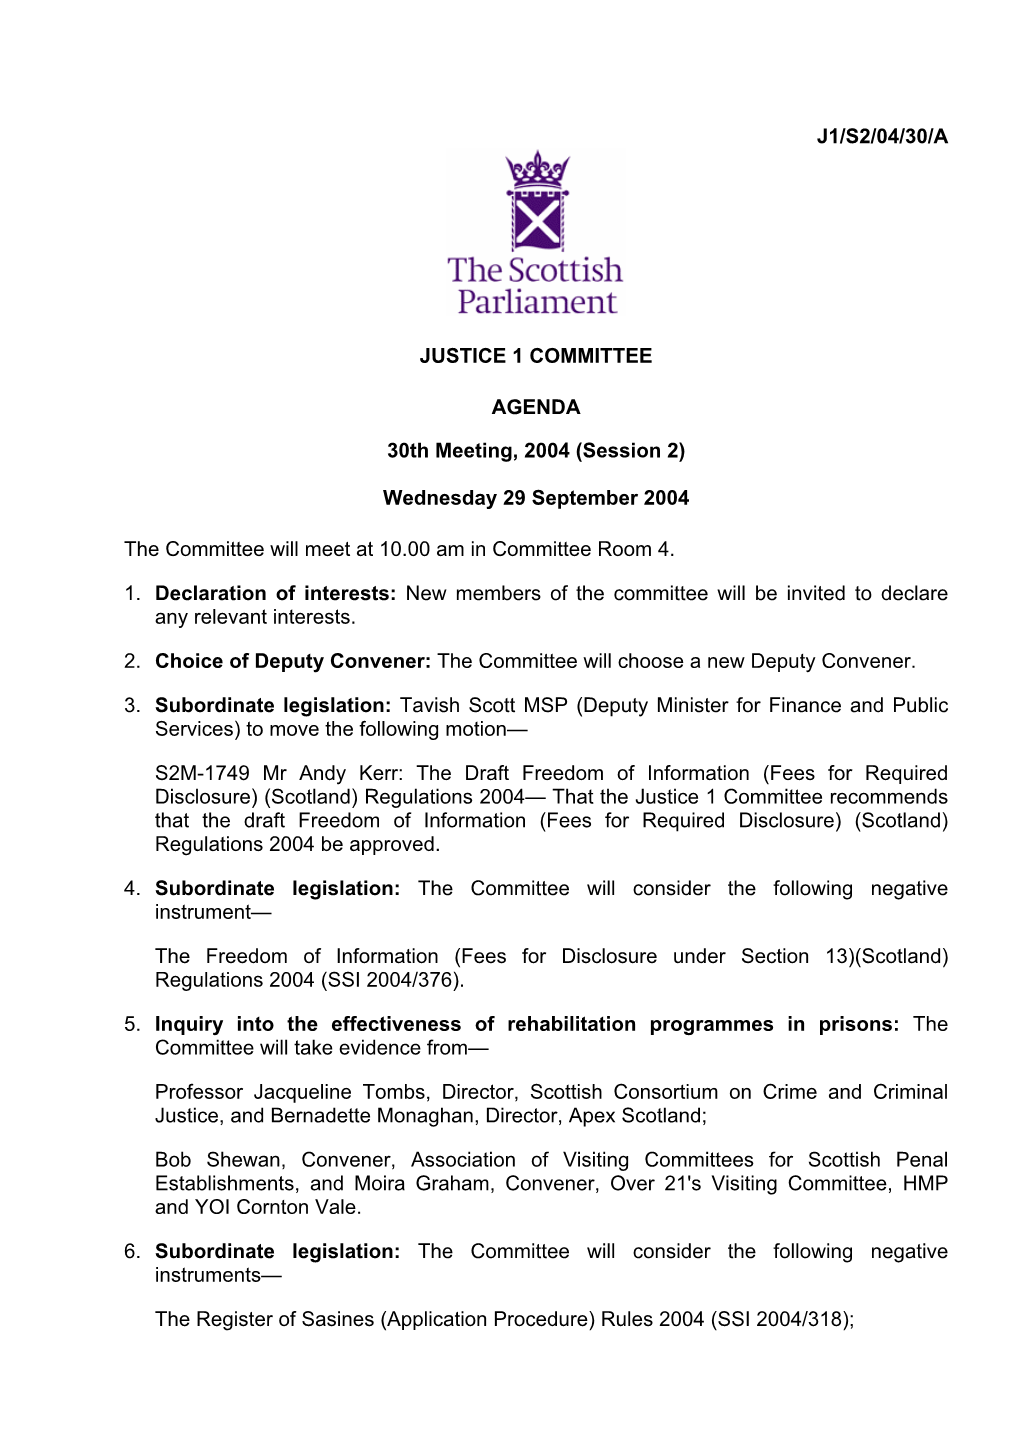 J1/S2/04/30/A JUSTICE 1 COMMITTEE AGENDA 30Th